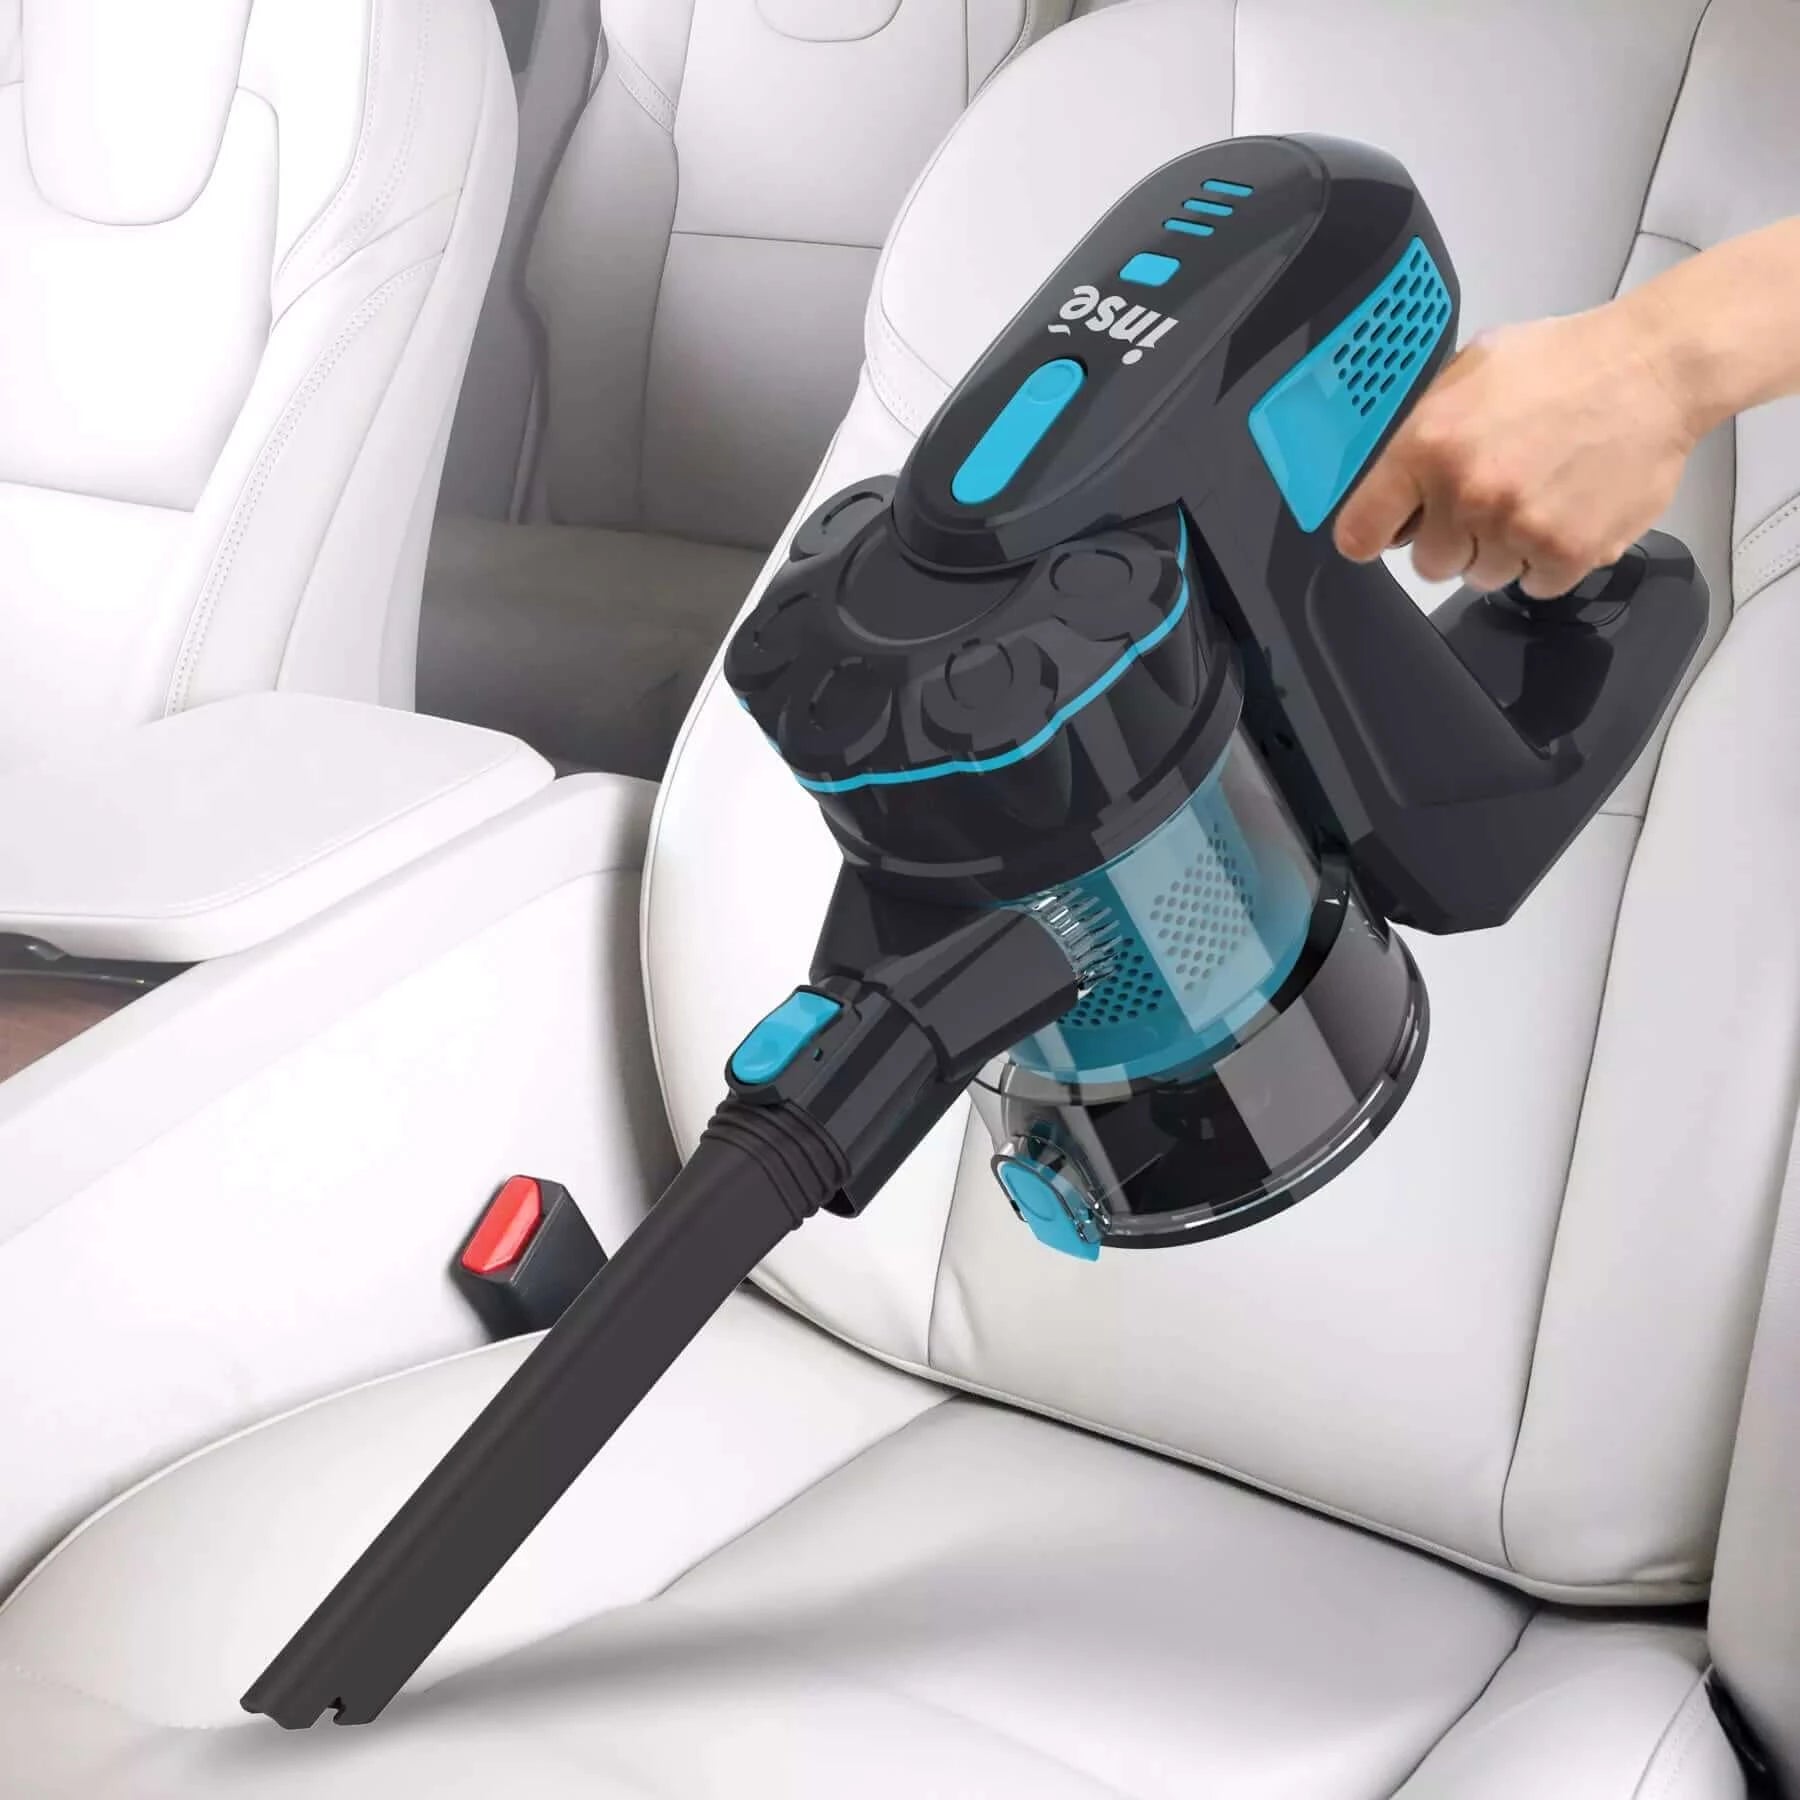 INSE V70 cordless vacuum under $100 for furniture with crevice tool-inselife.com